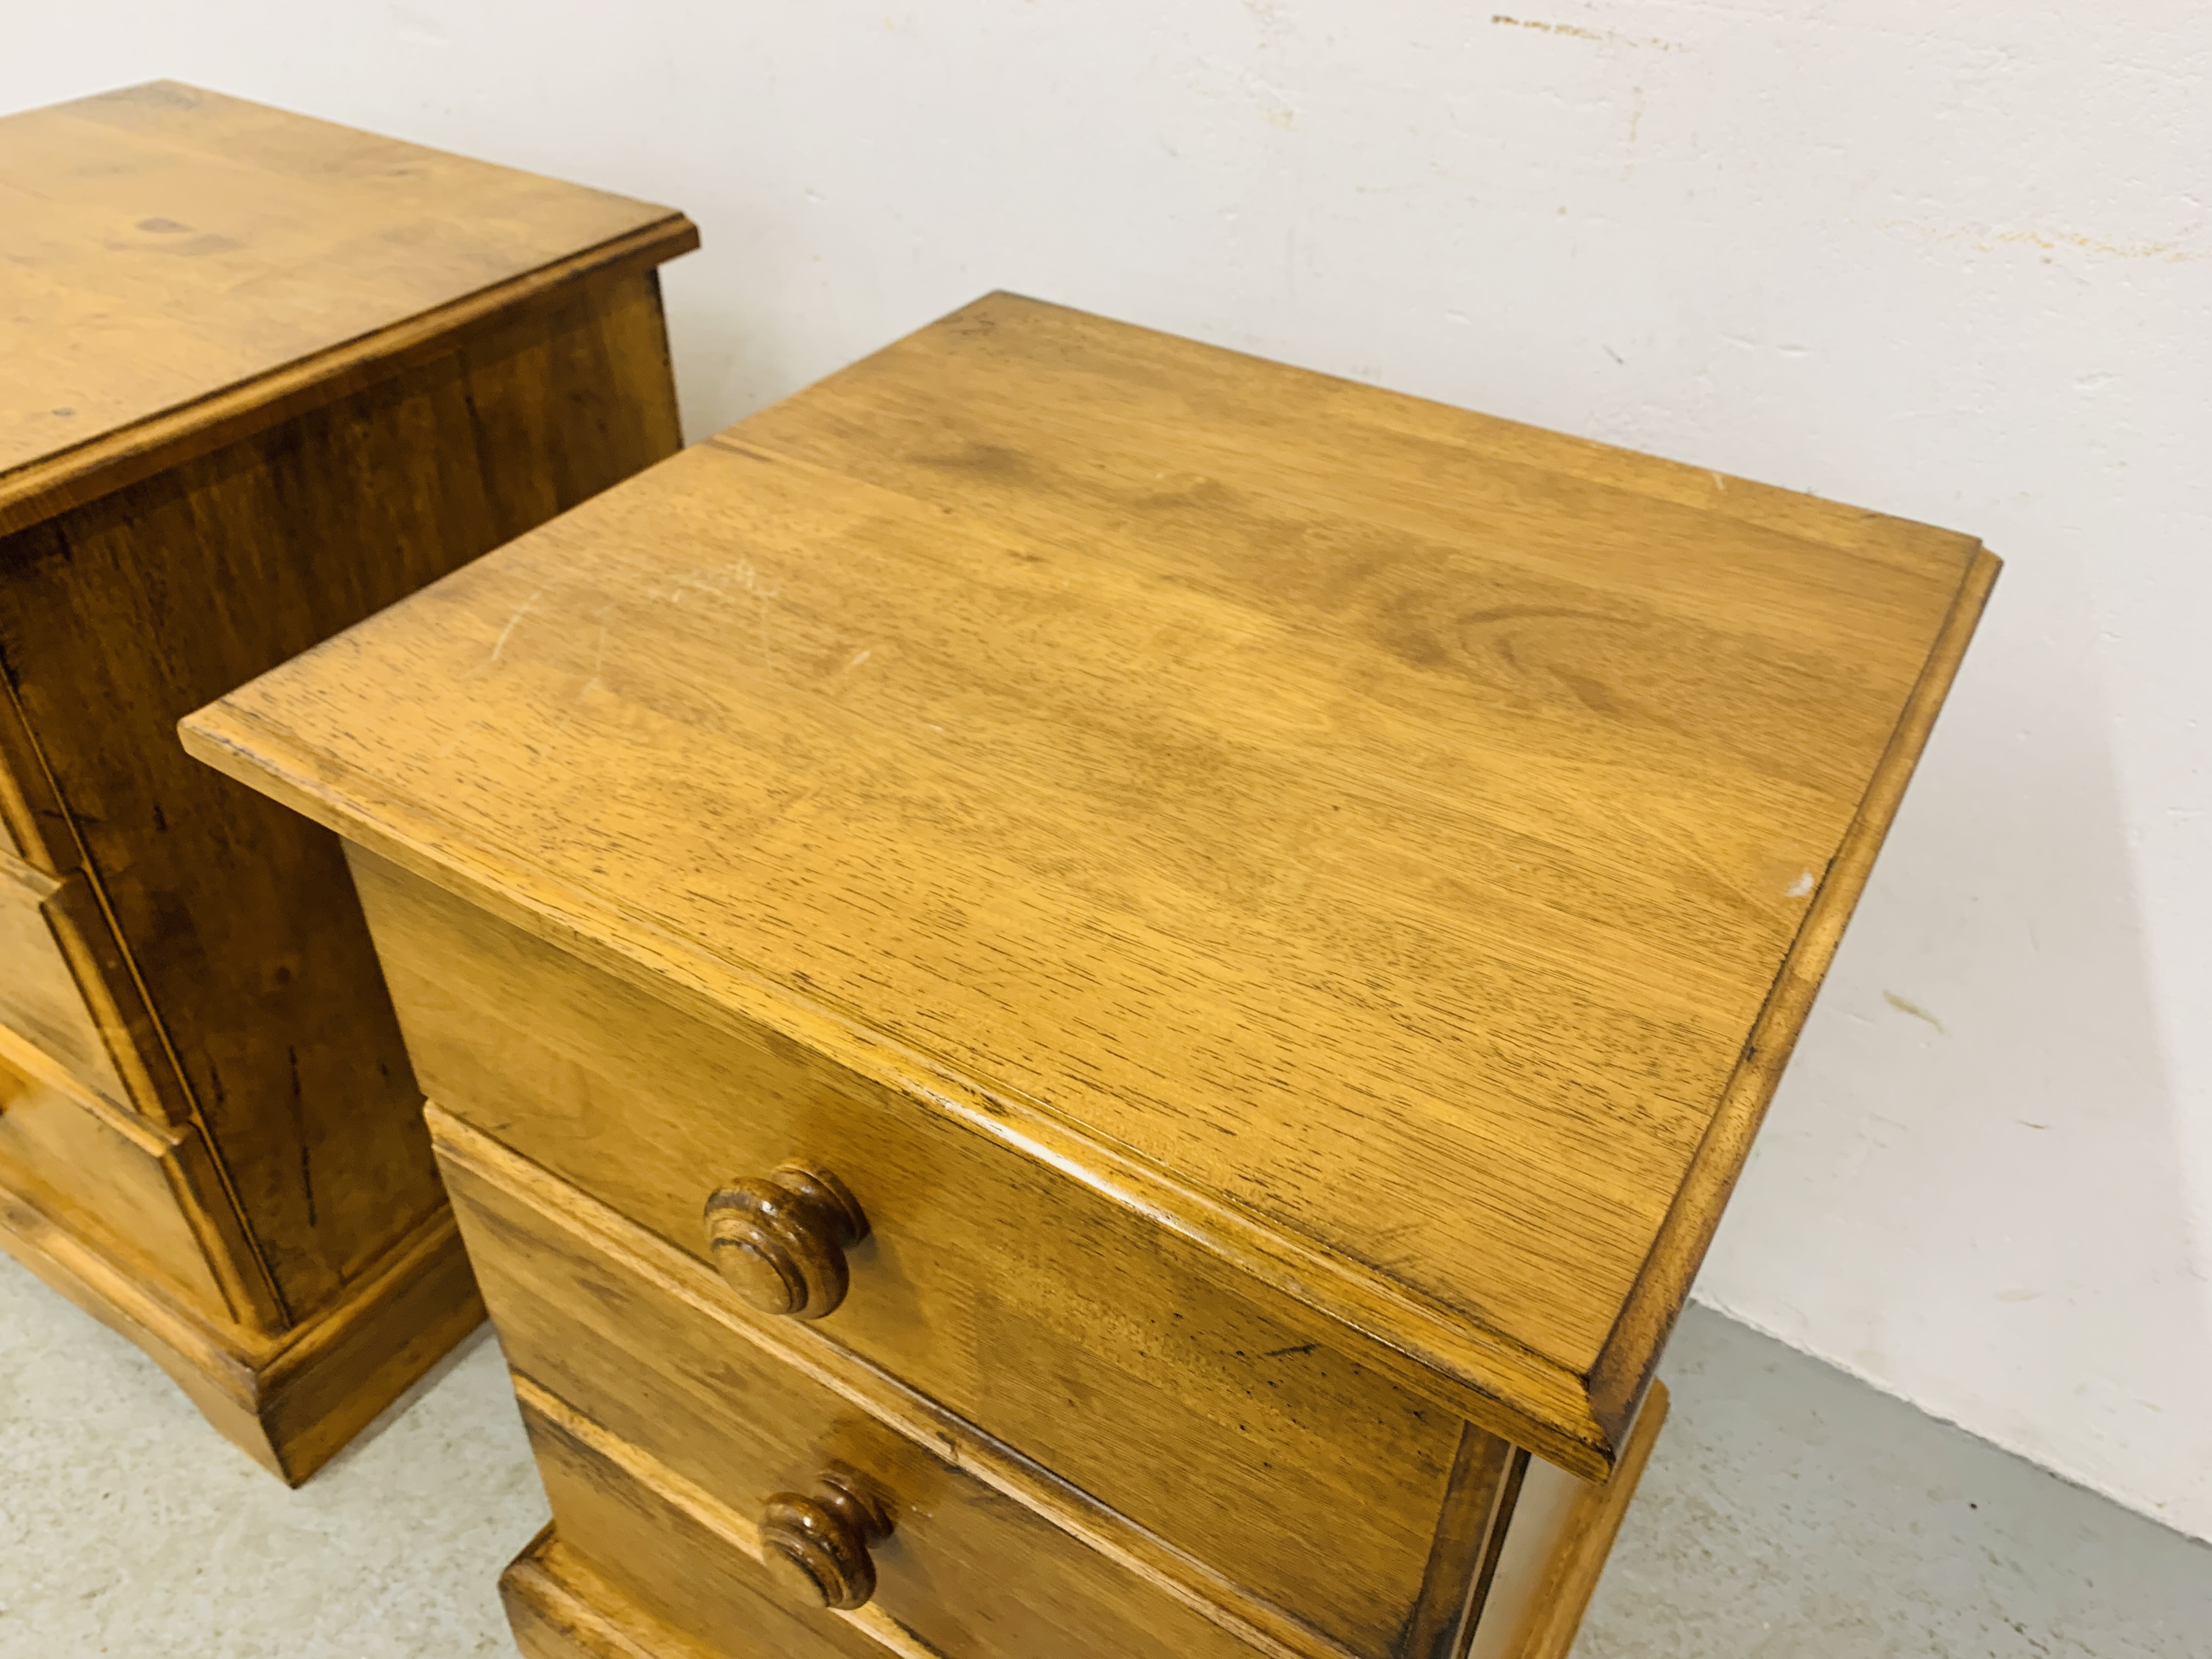 PAIR OF MODERN HARDWOOD 3 DRAWER BEDSIDE CHESTS, WITH TURNED HANDLES - W 49CM. D 46CM. H 63CM. - Image 4 of 6